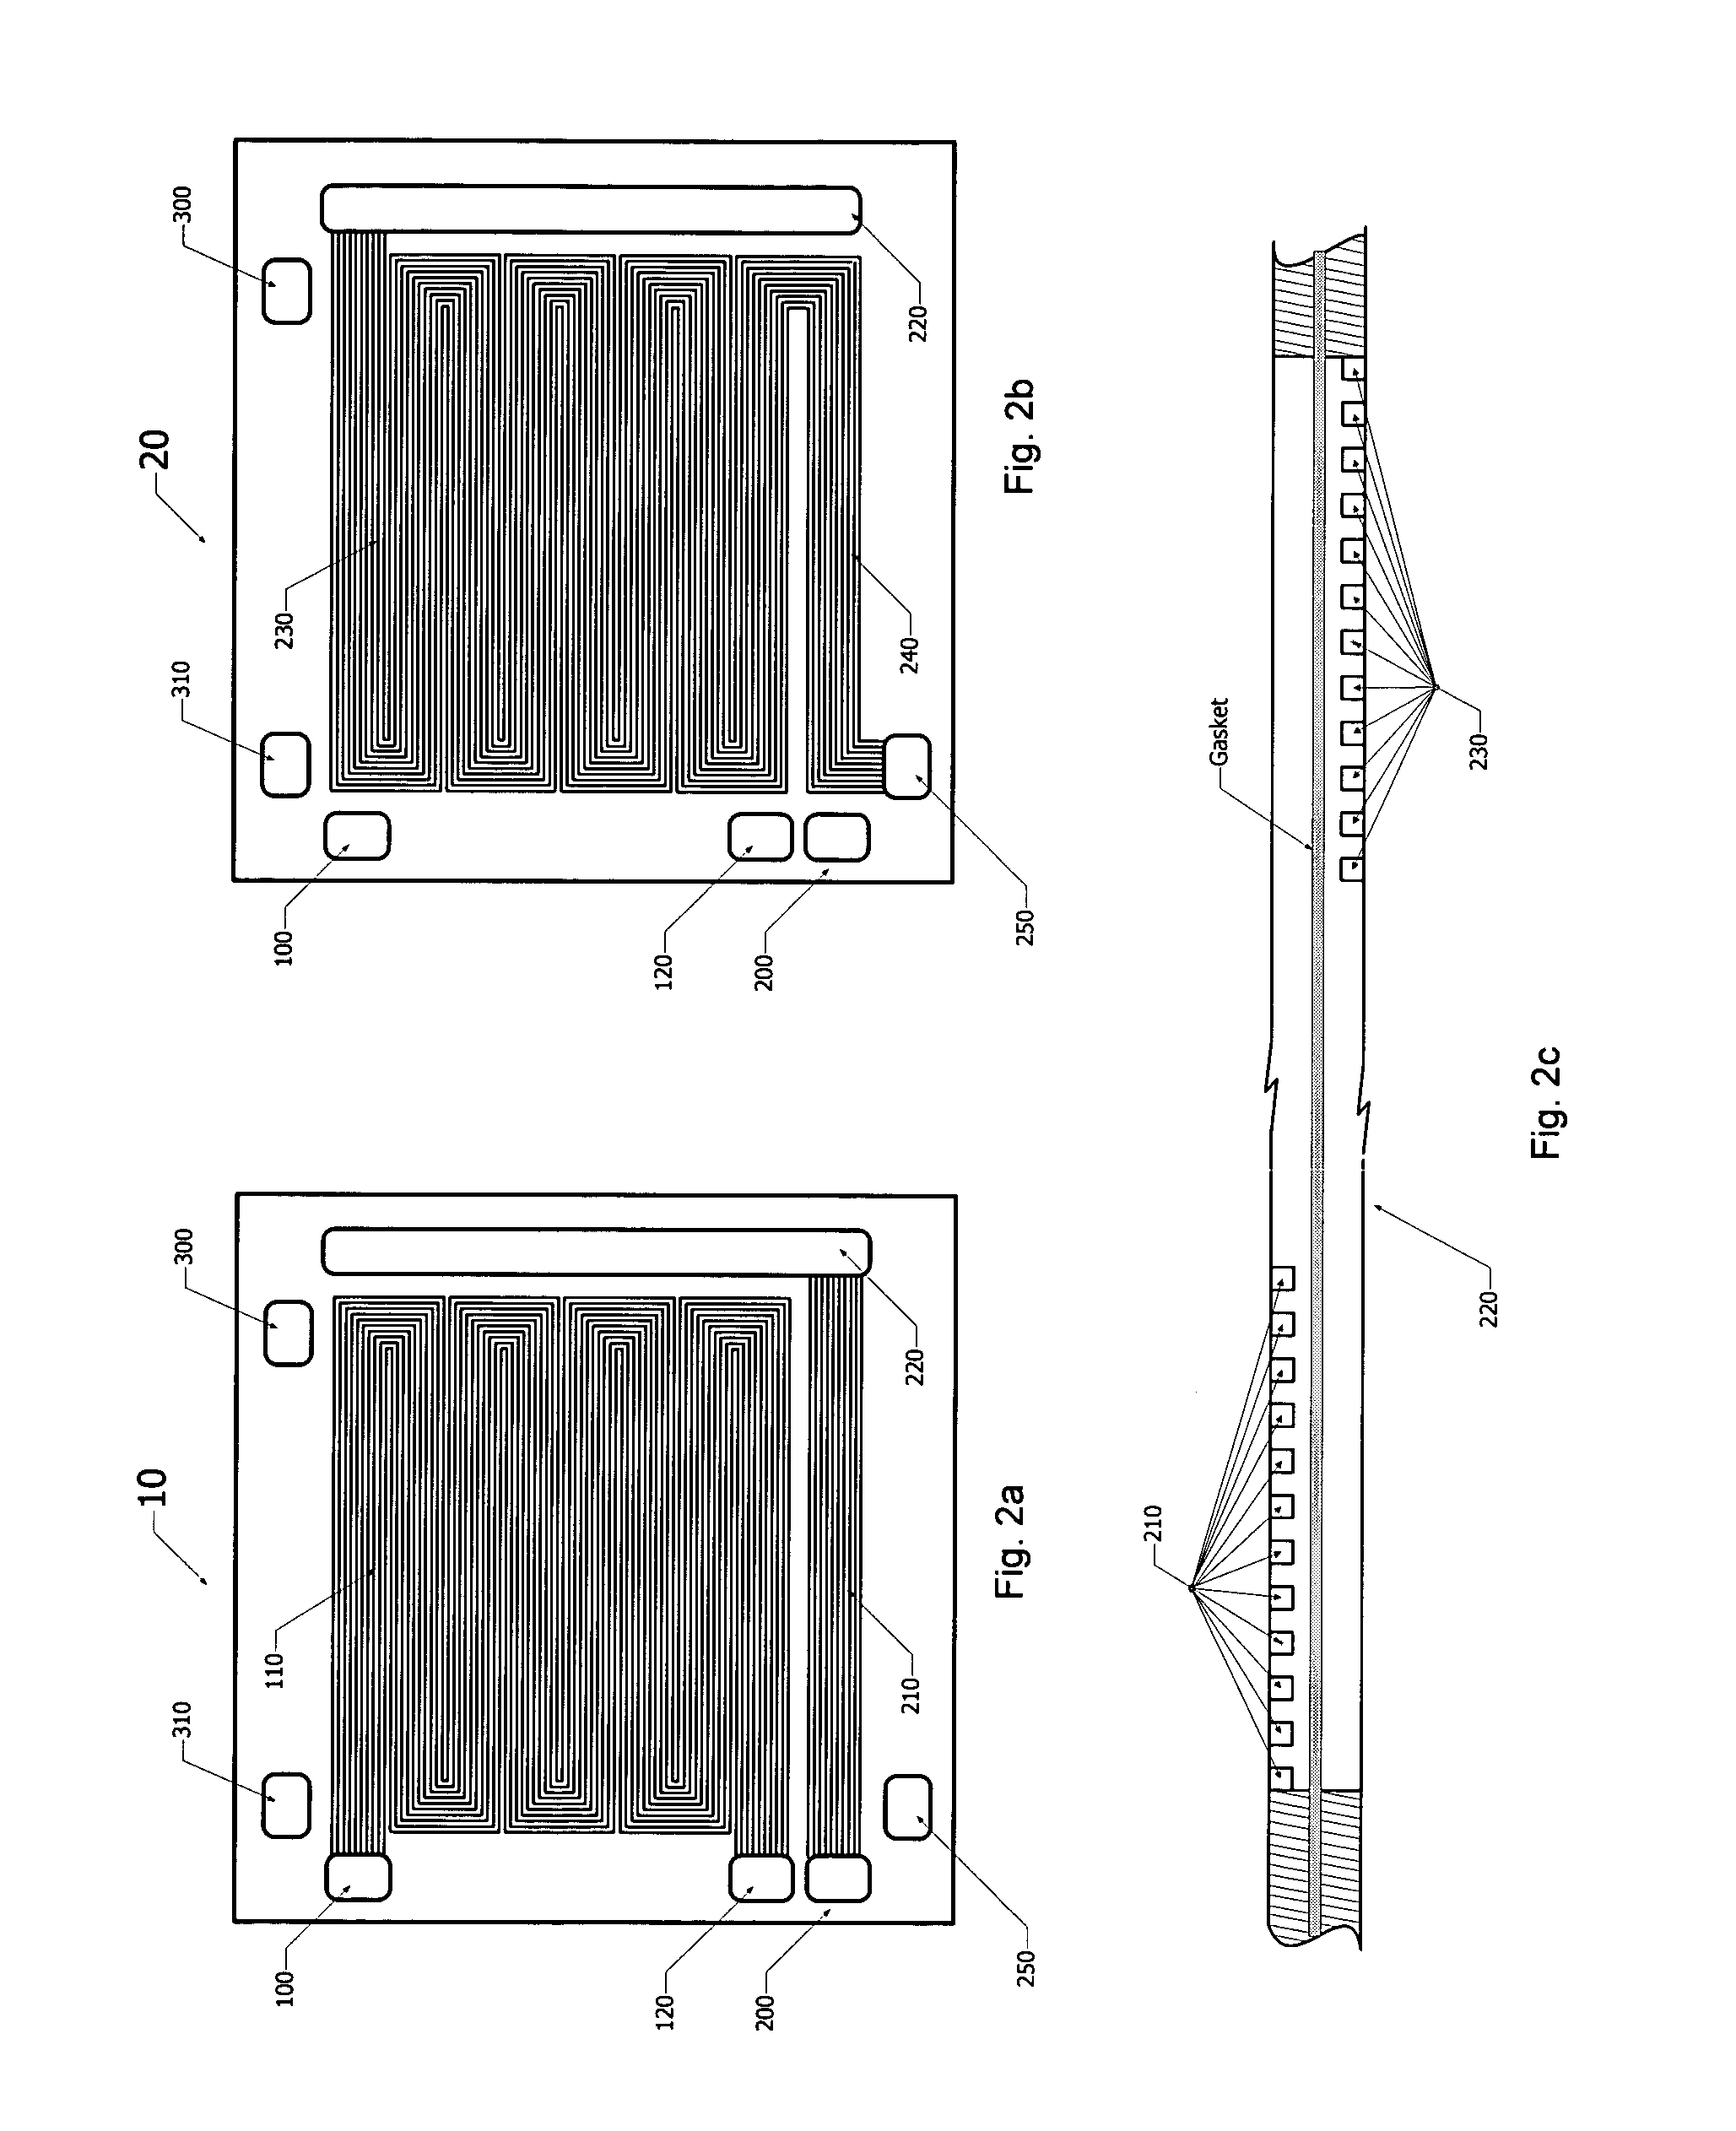 Fuel cell with in-cell humidification